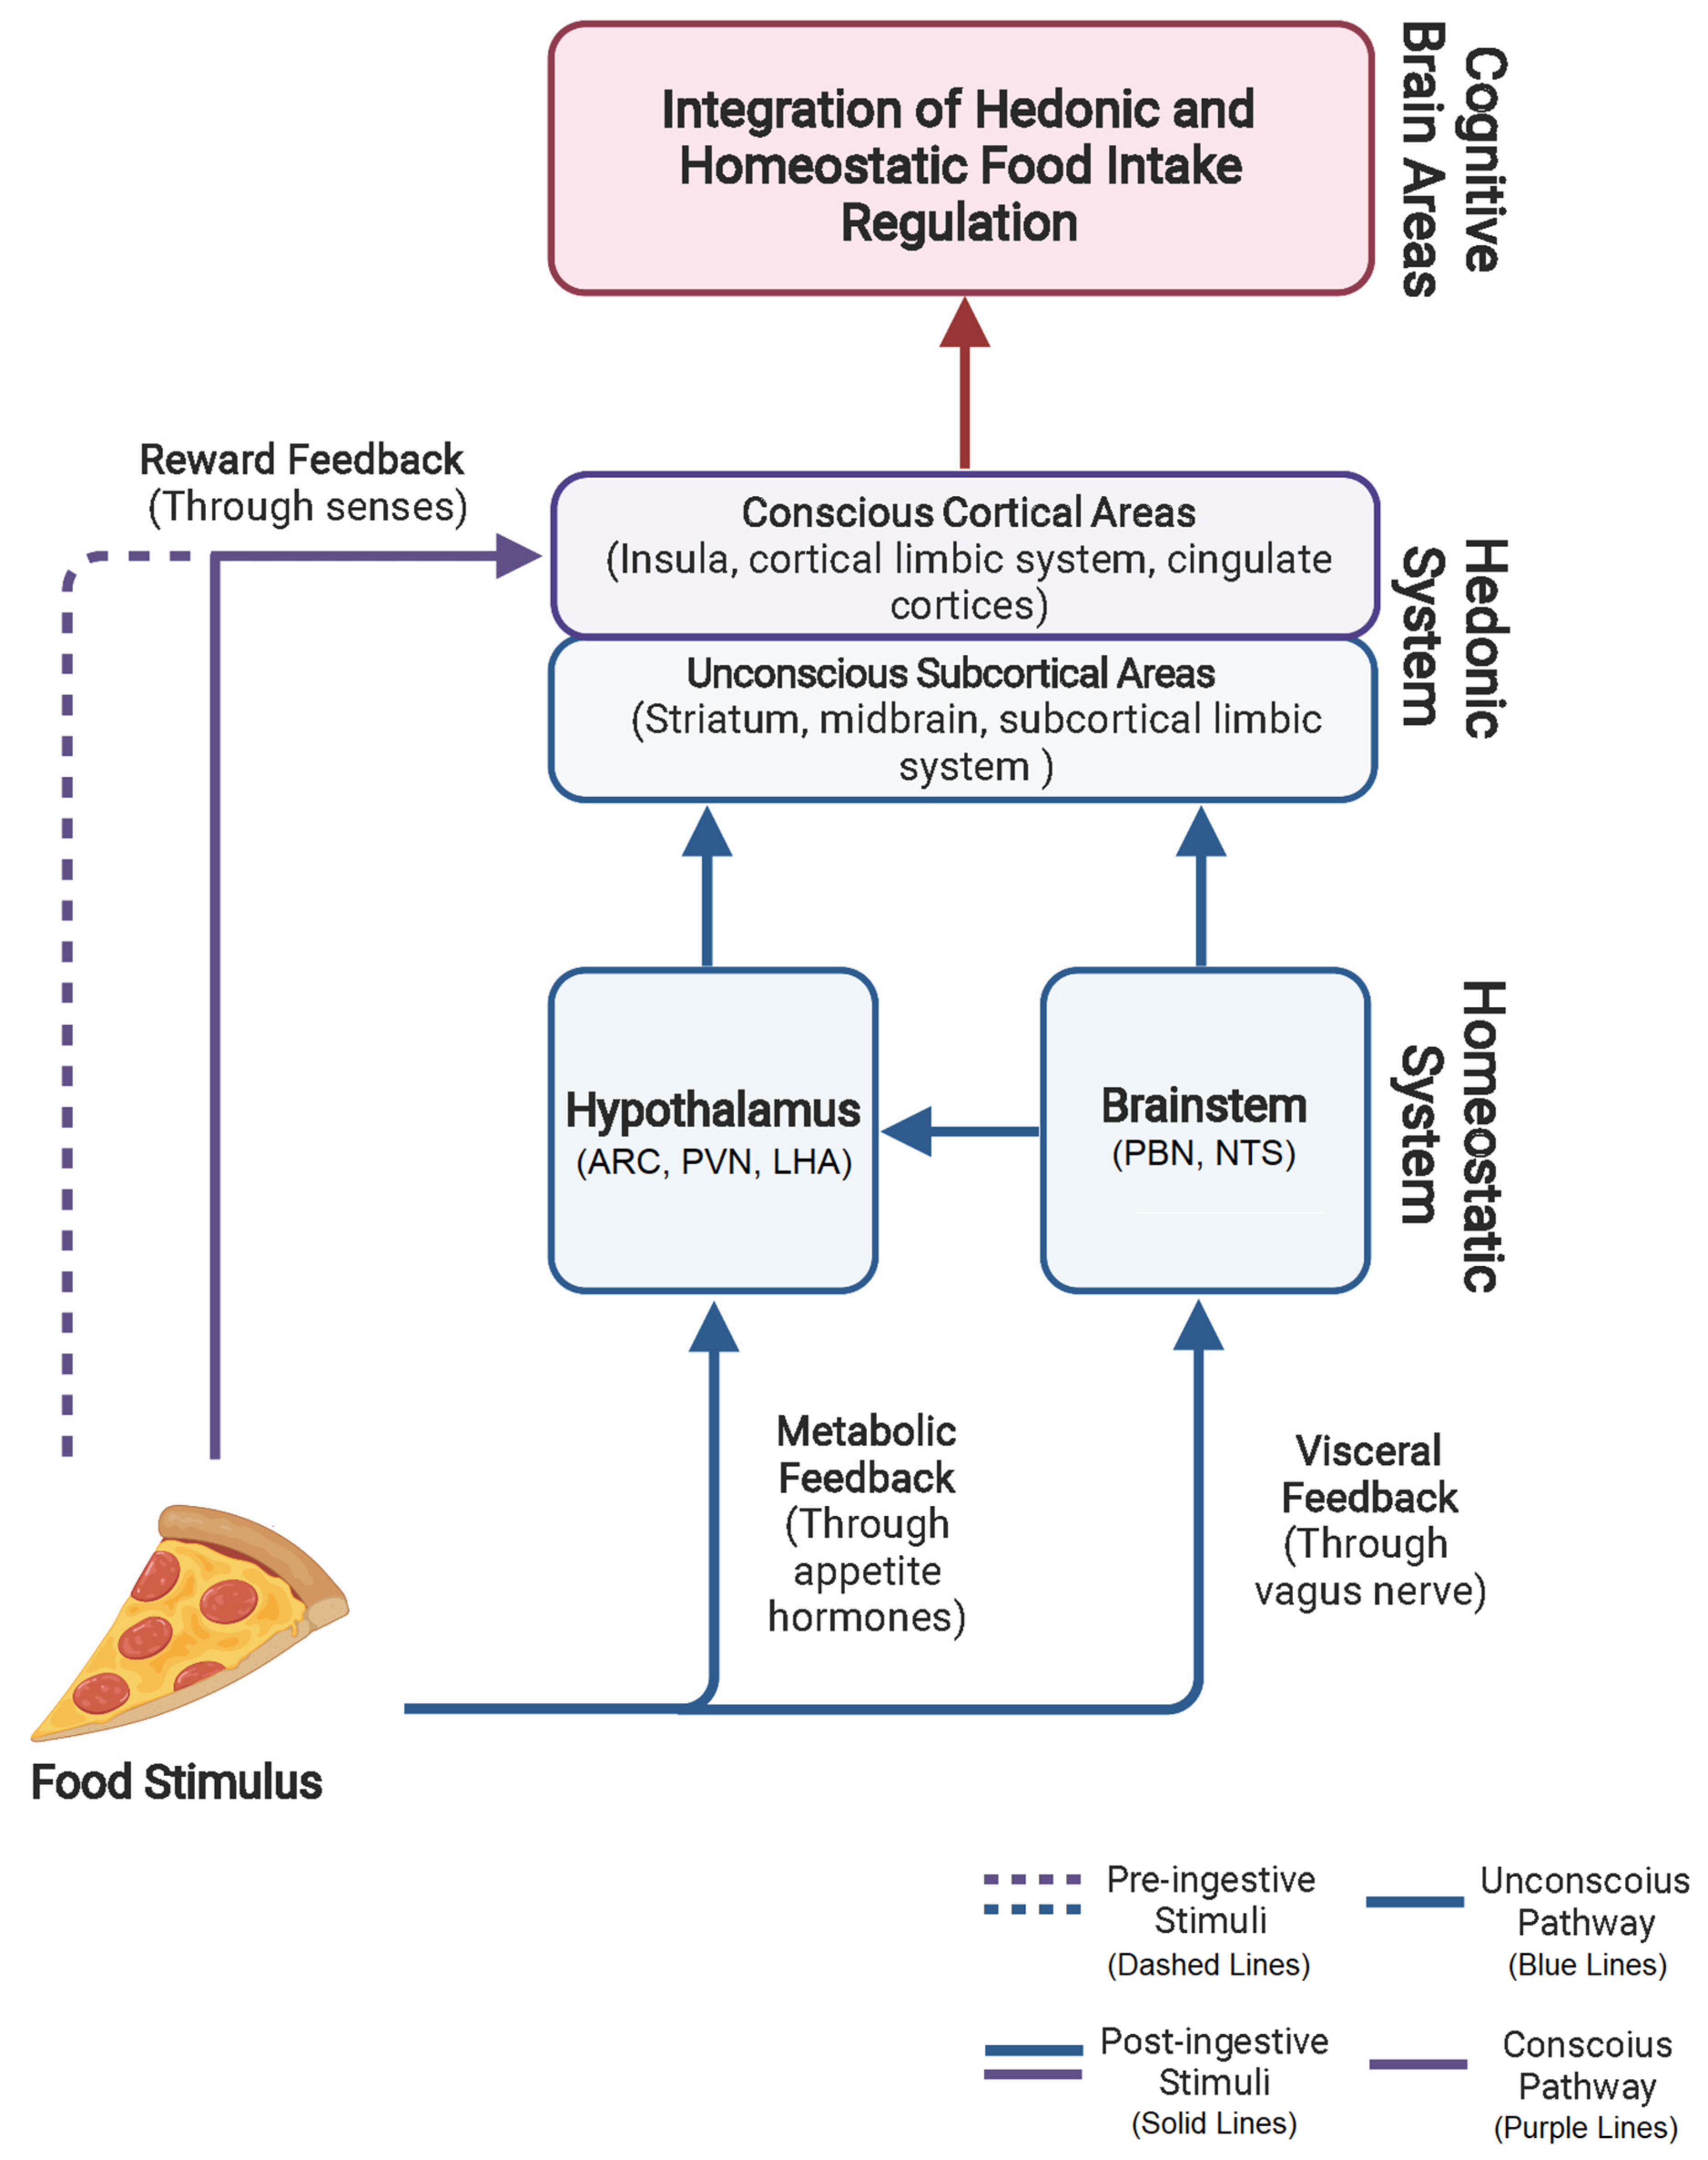 Brain Sciences Free Full-Text Integrative Hedonic and Homeostatic Food Intake Regulation by the Central Nervous System Insights from Neuroimaging pic